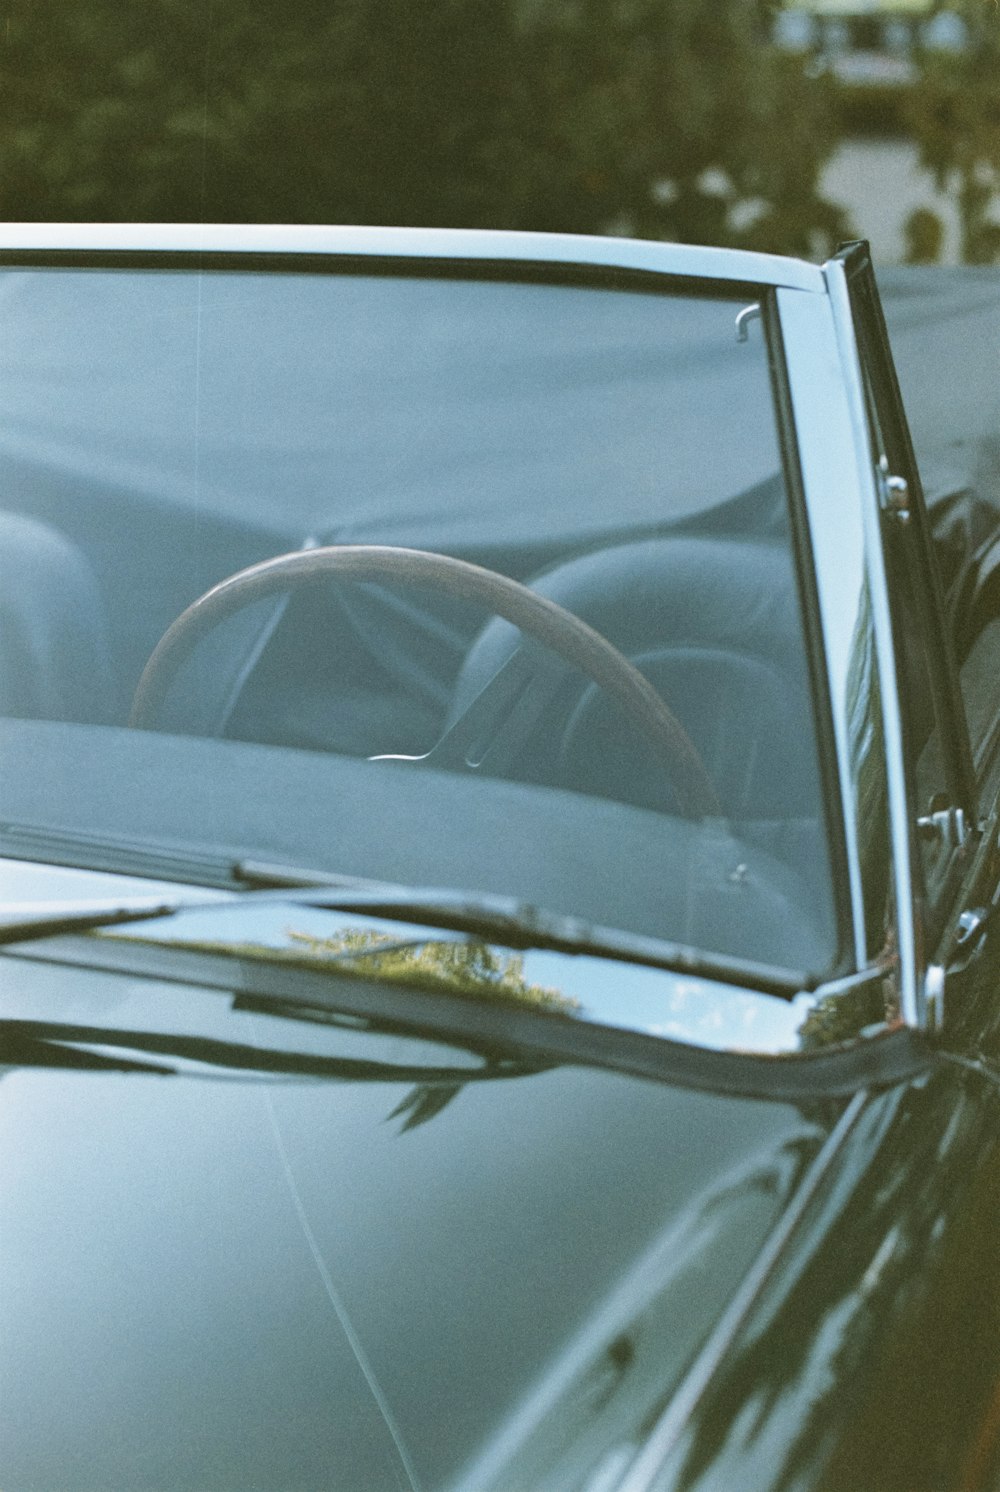 a close up of a car with a steering wheel